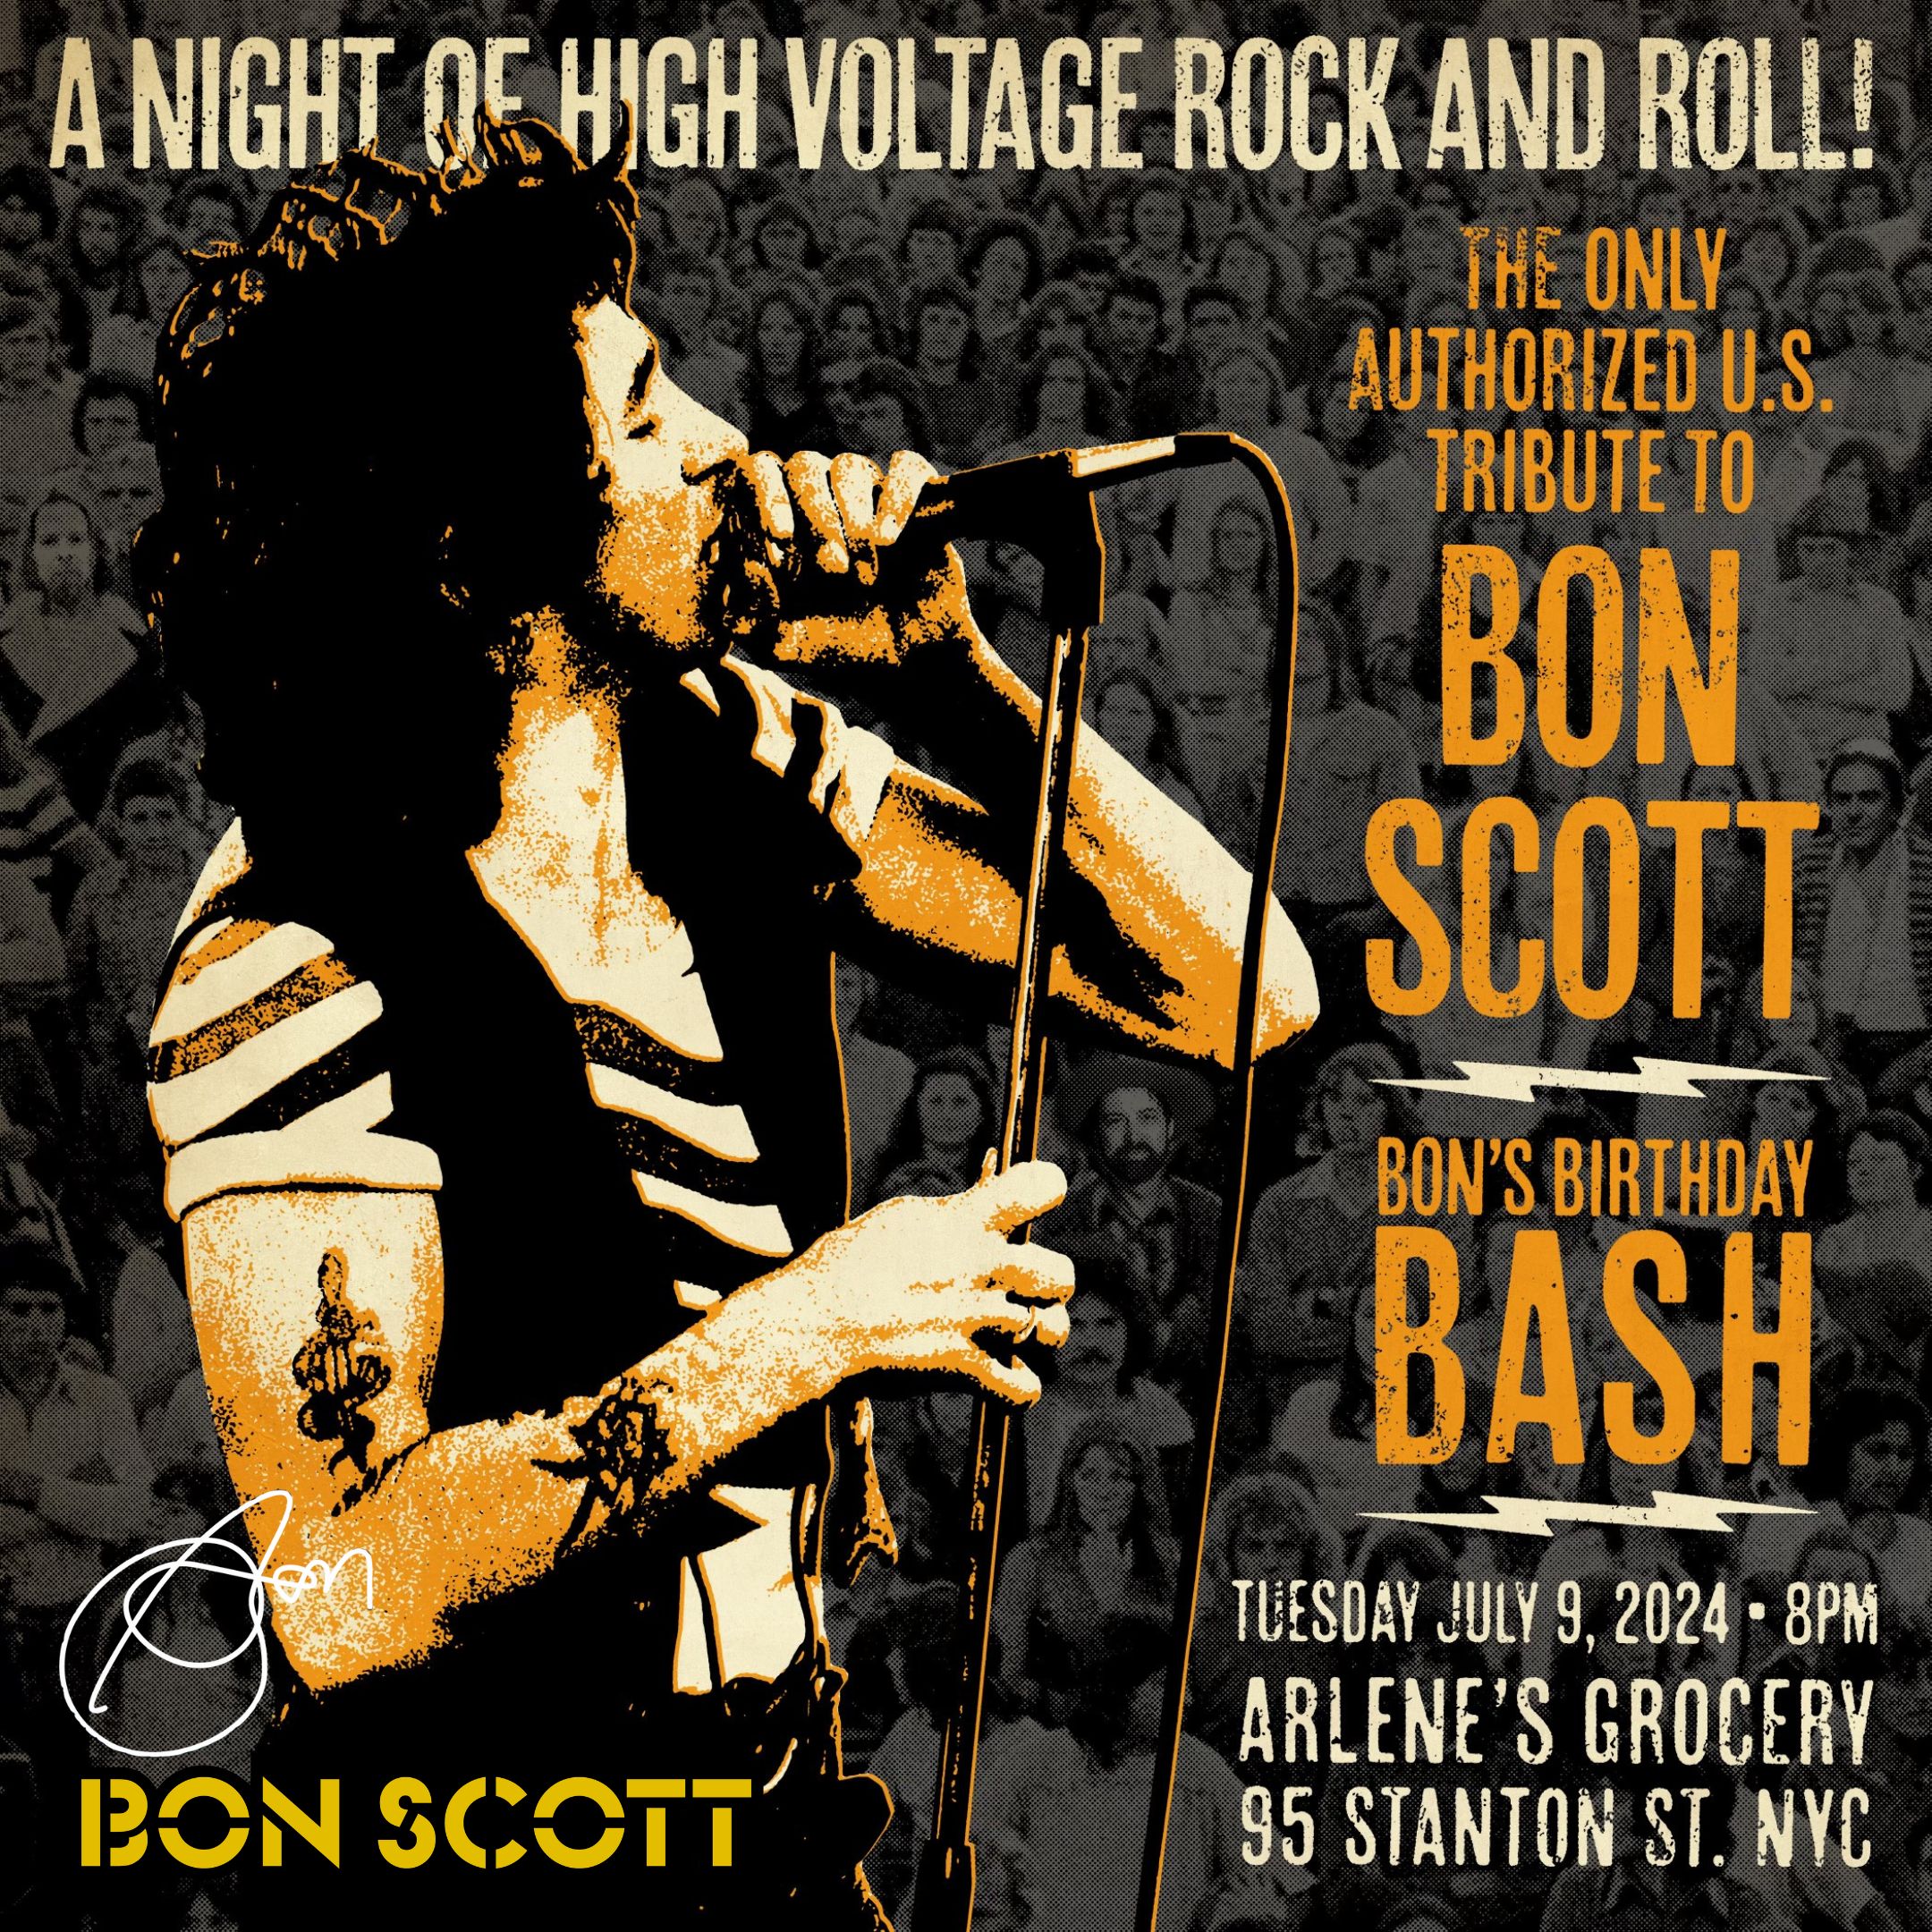 BON’S BIRTHDAY BASH TRIBUTE SHOW NYC! A Night Of High Voltage Rock And Roll – July 9, 2024. Tickets on sale NOW!